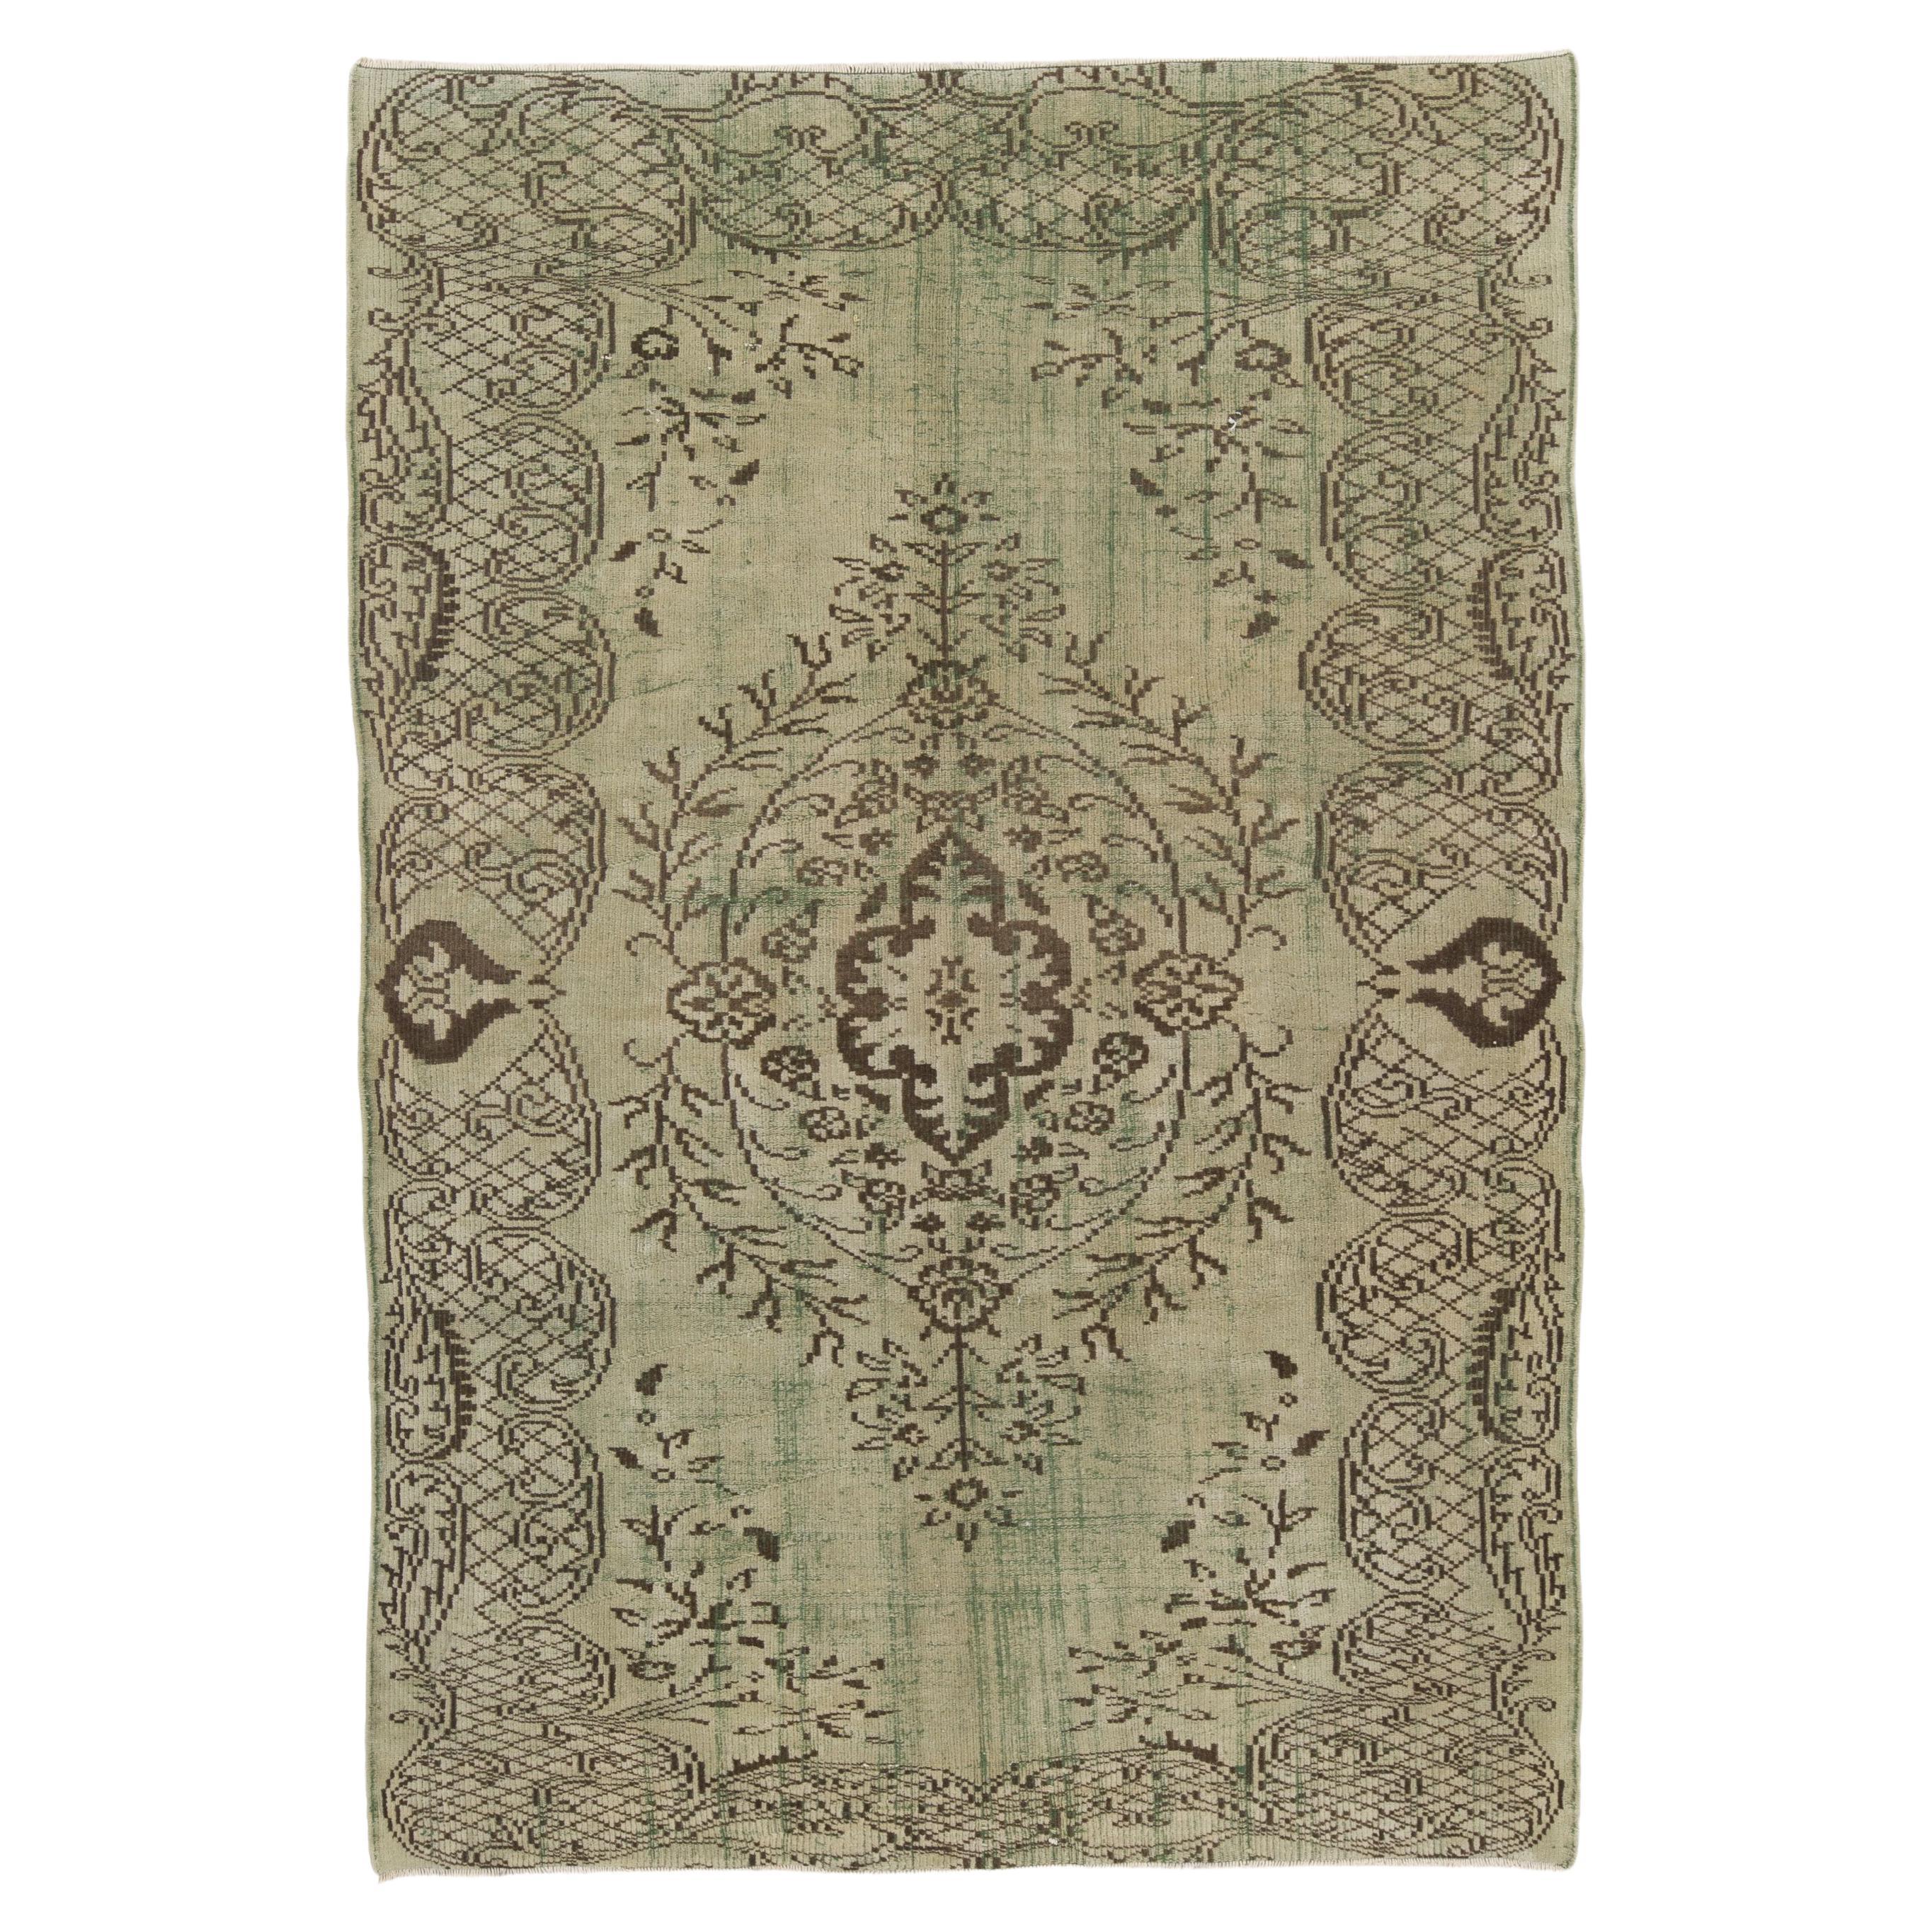 6x8.6 Ft Hand Knotted Vintage Central Anatolian Area Rug in Shades of Green